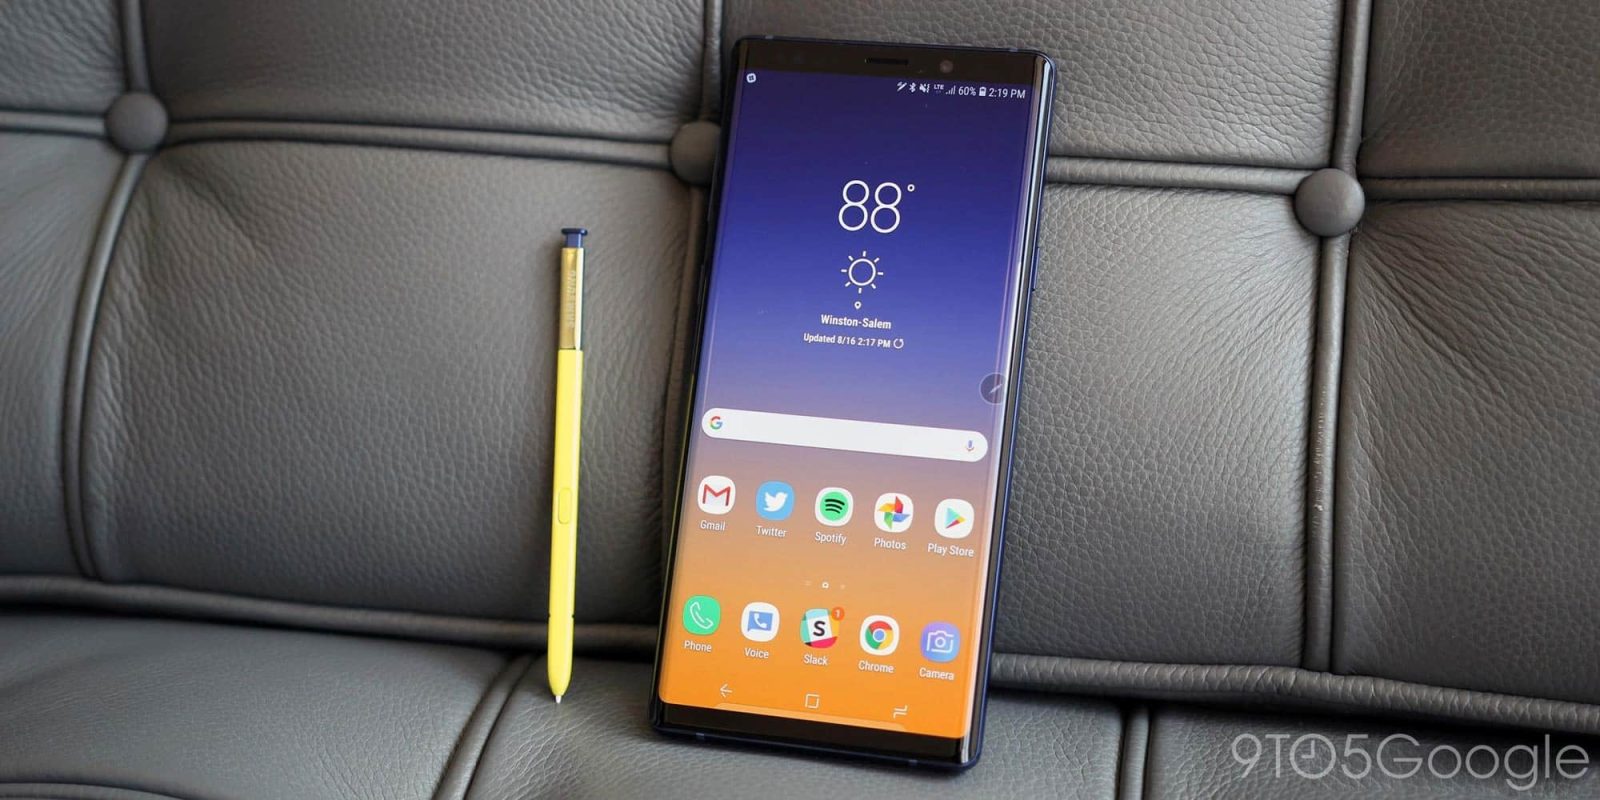 Should you buy a Galaxy Note 8 in 2022?